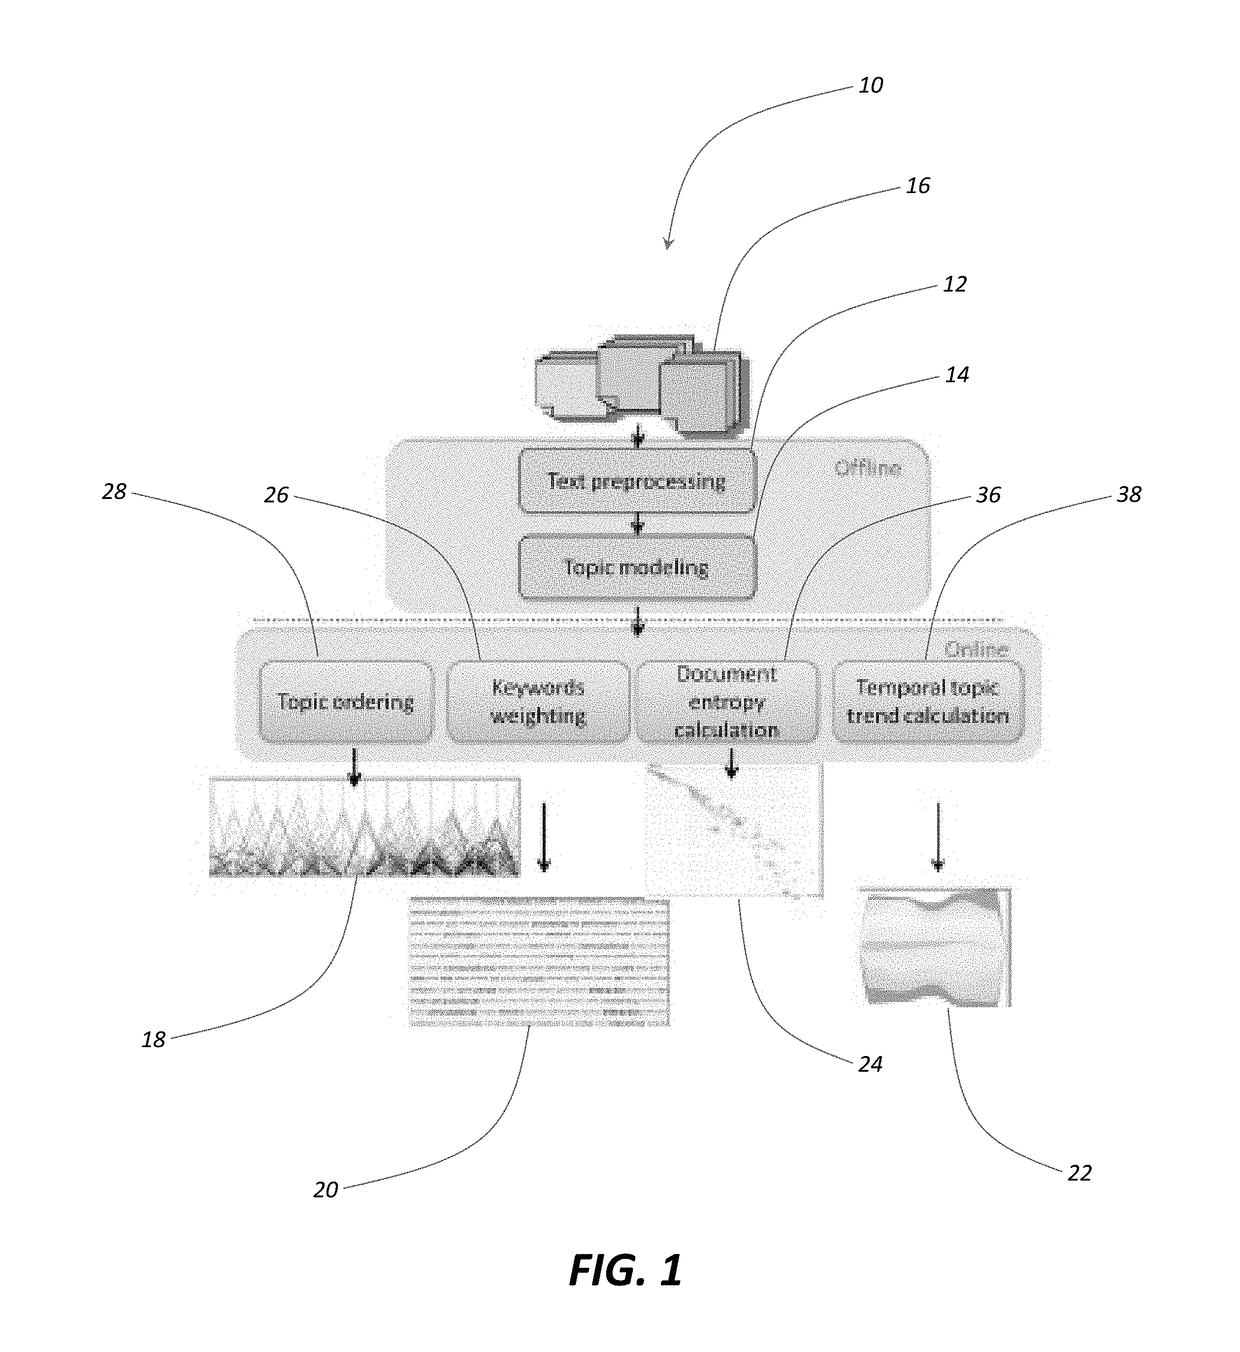 Artificial intelligence optimized unstructured data analytics systems and methods